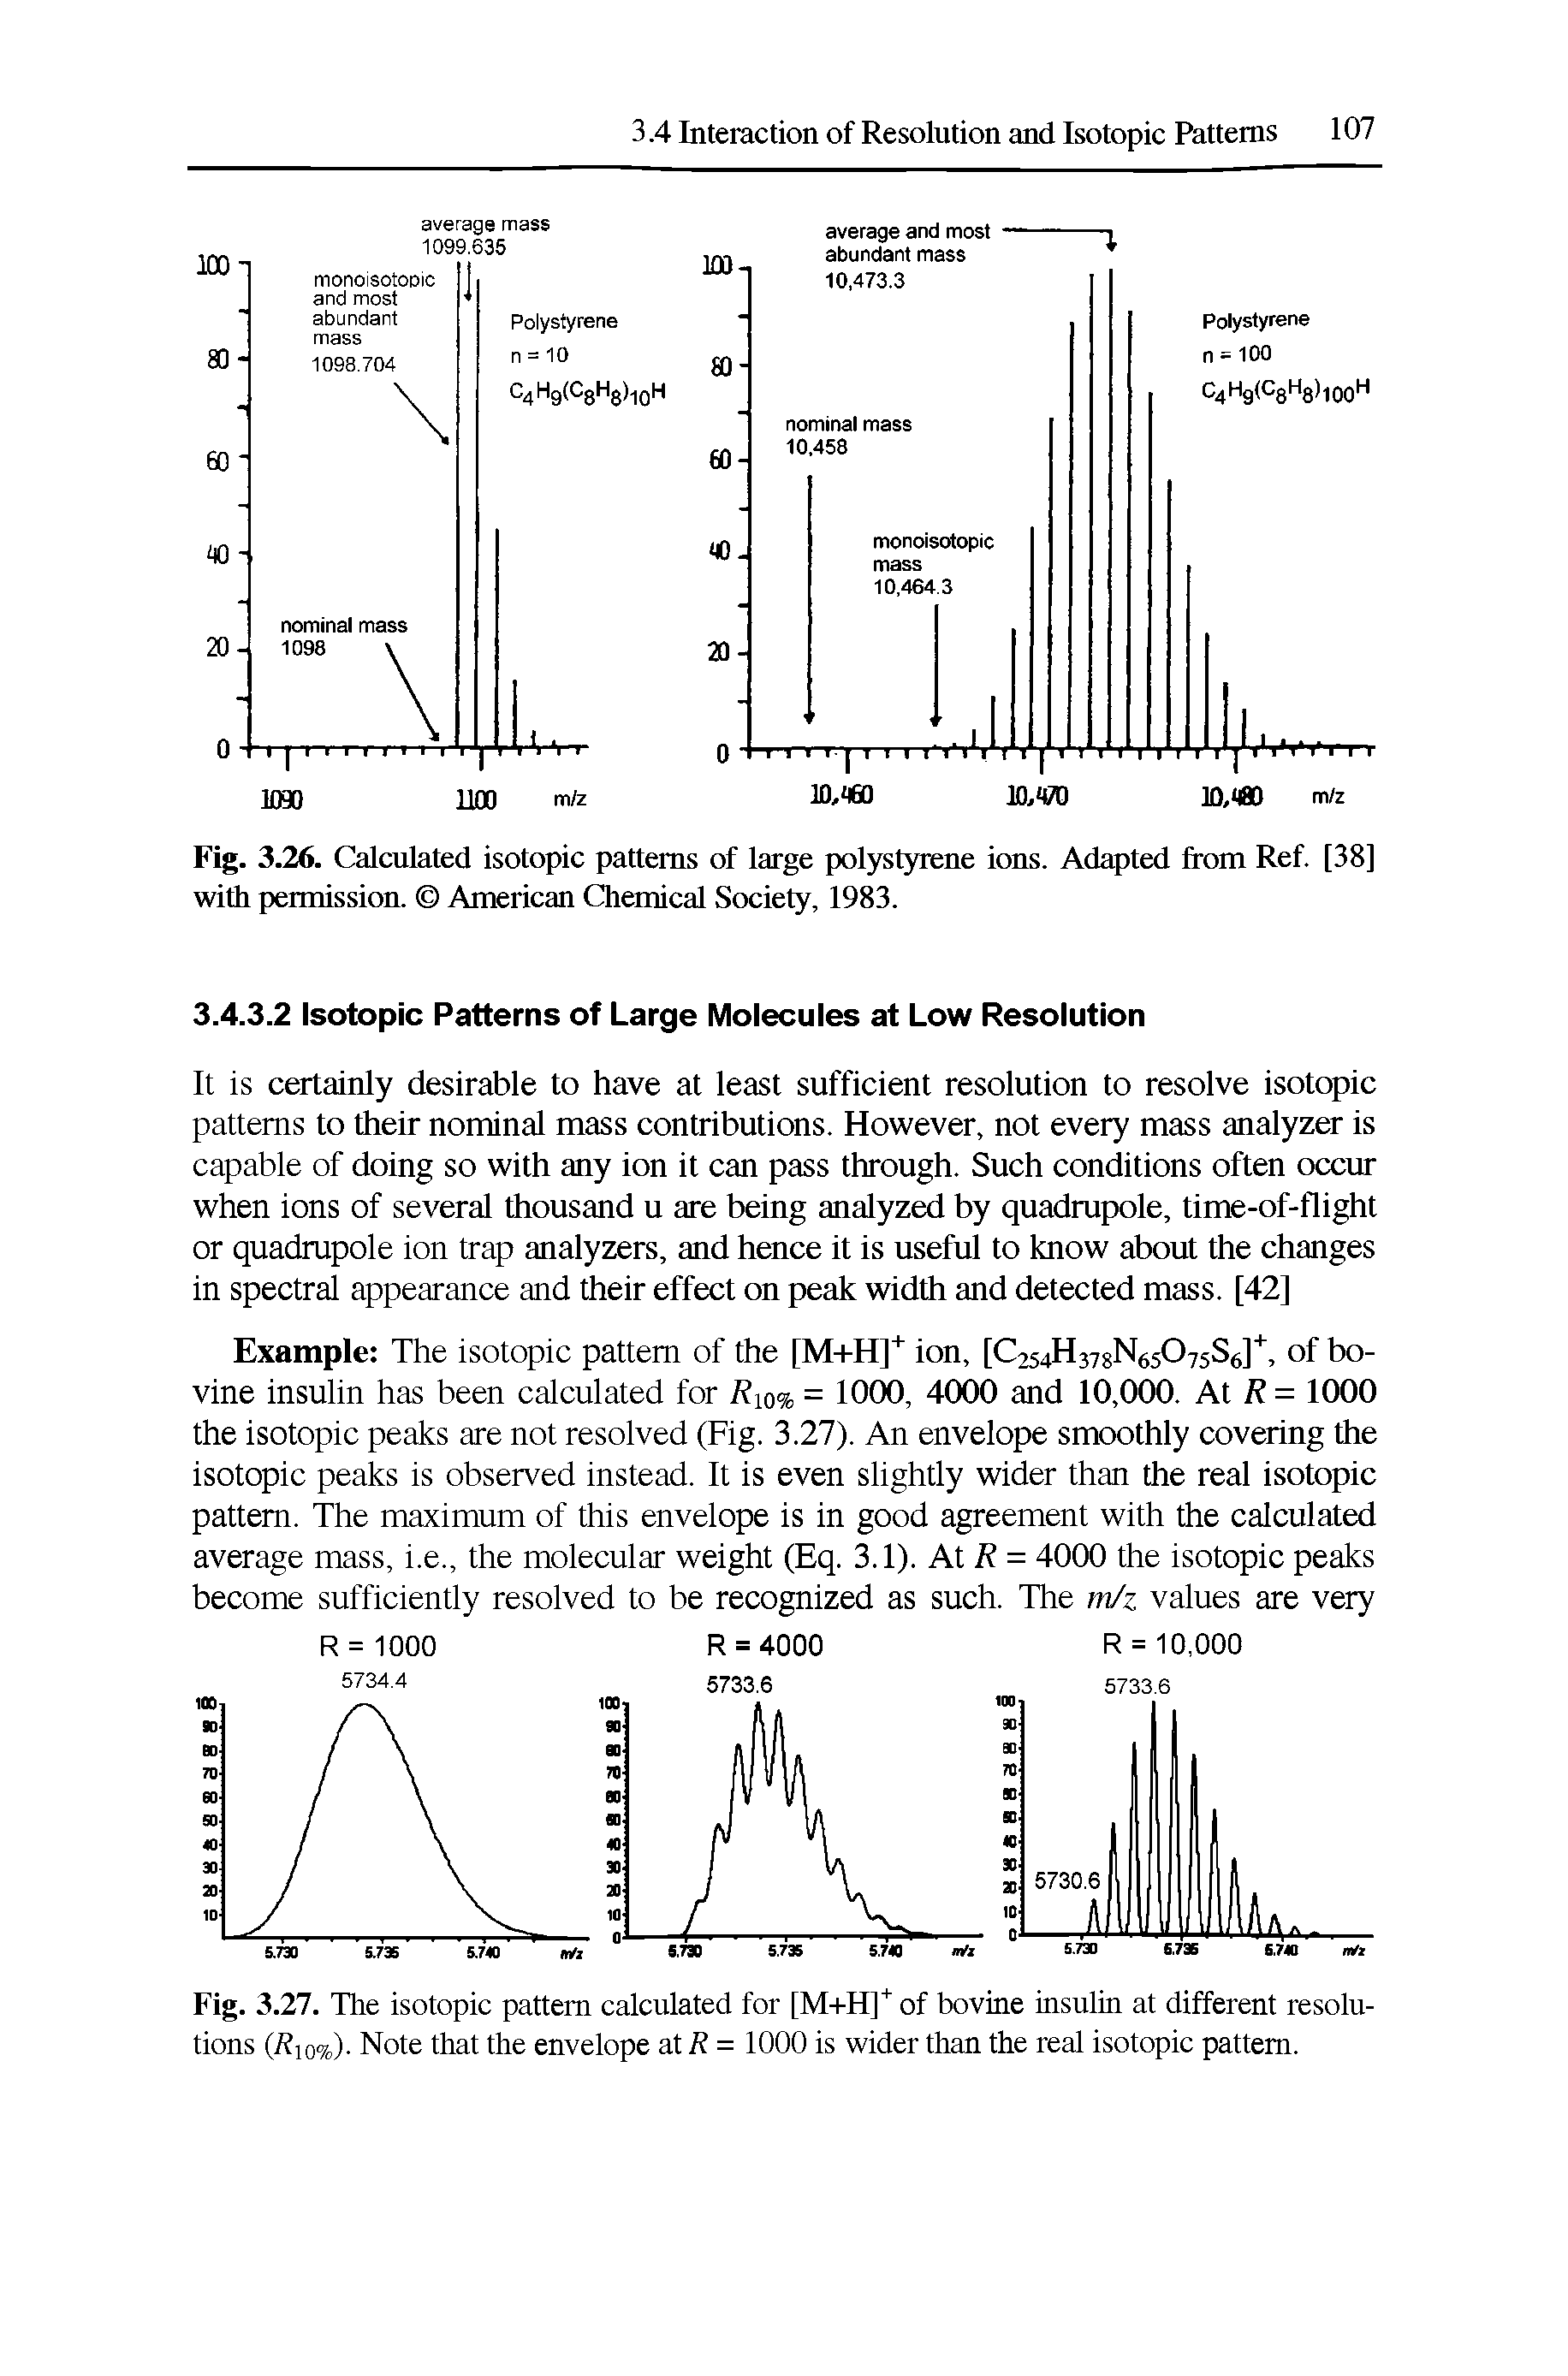 Fig. 3.26. Calculated isotopic patterns of large polystyrene ions. Adapted from Ref. [38] with permission. American Chemical Society, 1983.